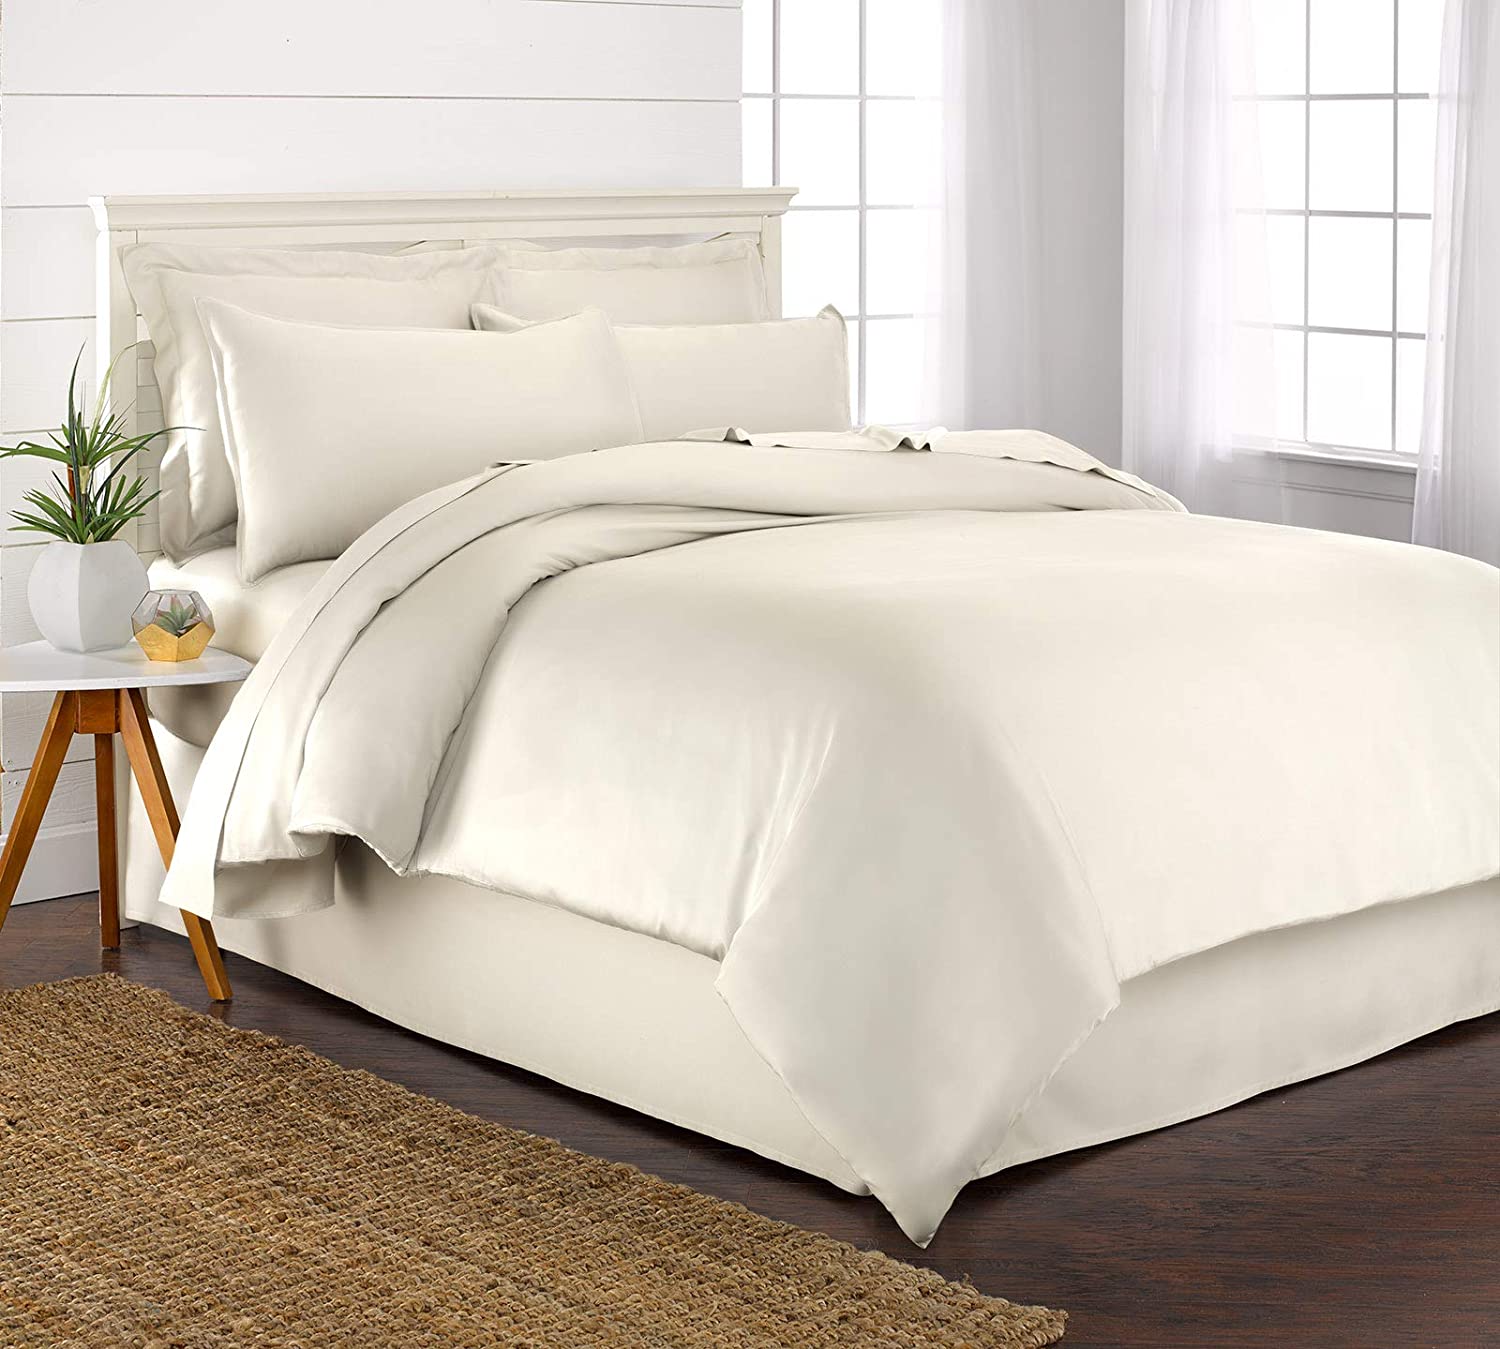 Price:$89.99  Bamboo Queen Duvet Cover Set - 100% Organic Bamboo, Luxuriously Soft and Cooling - 3 Piece Set Includes 1 Queen Button Closure Duvet Cover with Ties, 2 Pillow Sham Covers (Queen, Ivory) : Home & Kitchen